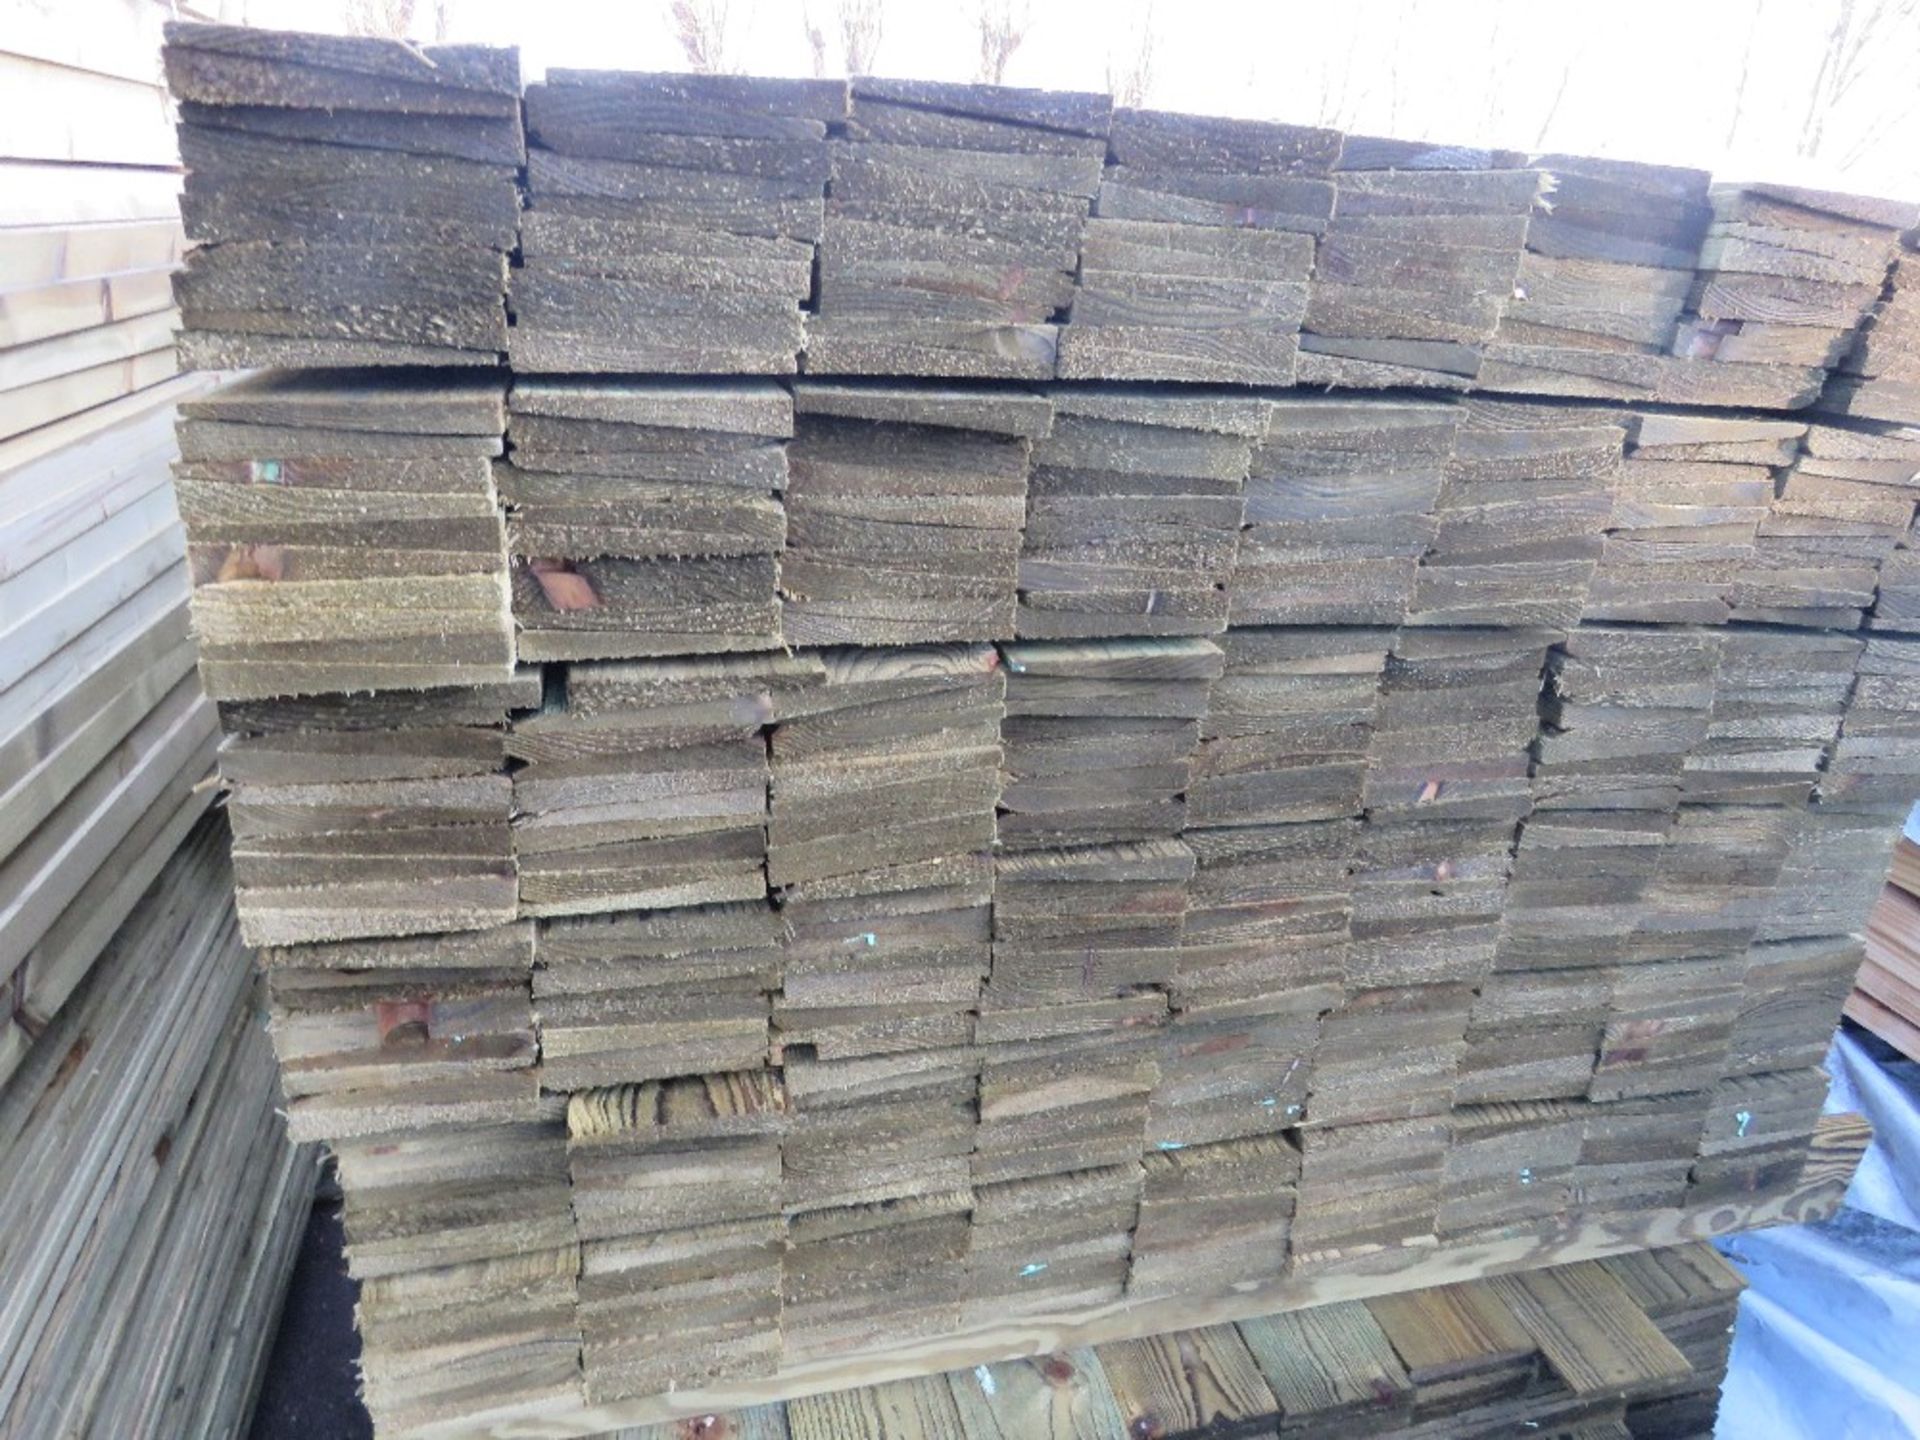 2 X BUNDLES OF PRESSURE TREATED FEATHER EDGE TIMBER CLADDING: 1.2M LENGTH X 10CM WIDTH APPROX. - Image 2 of 3